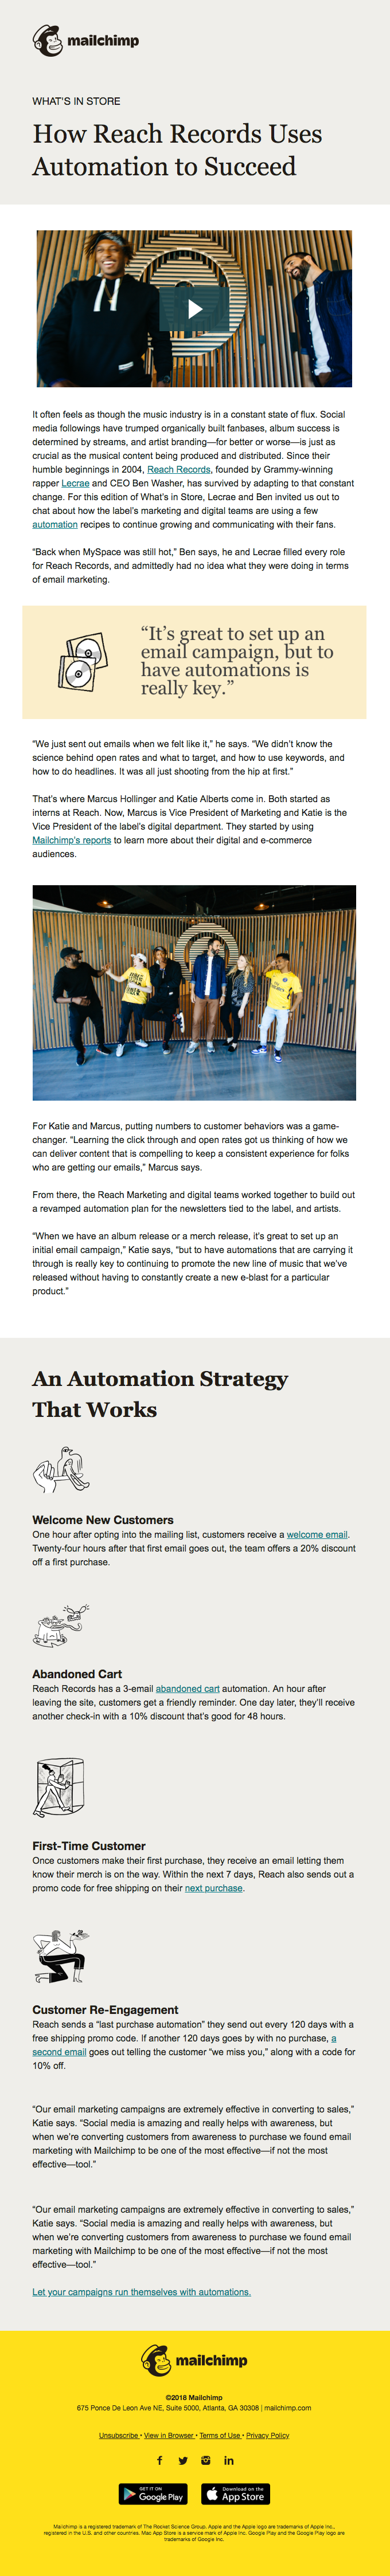 How Reach Records Uses Automation to Succeed